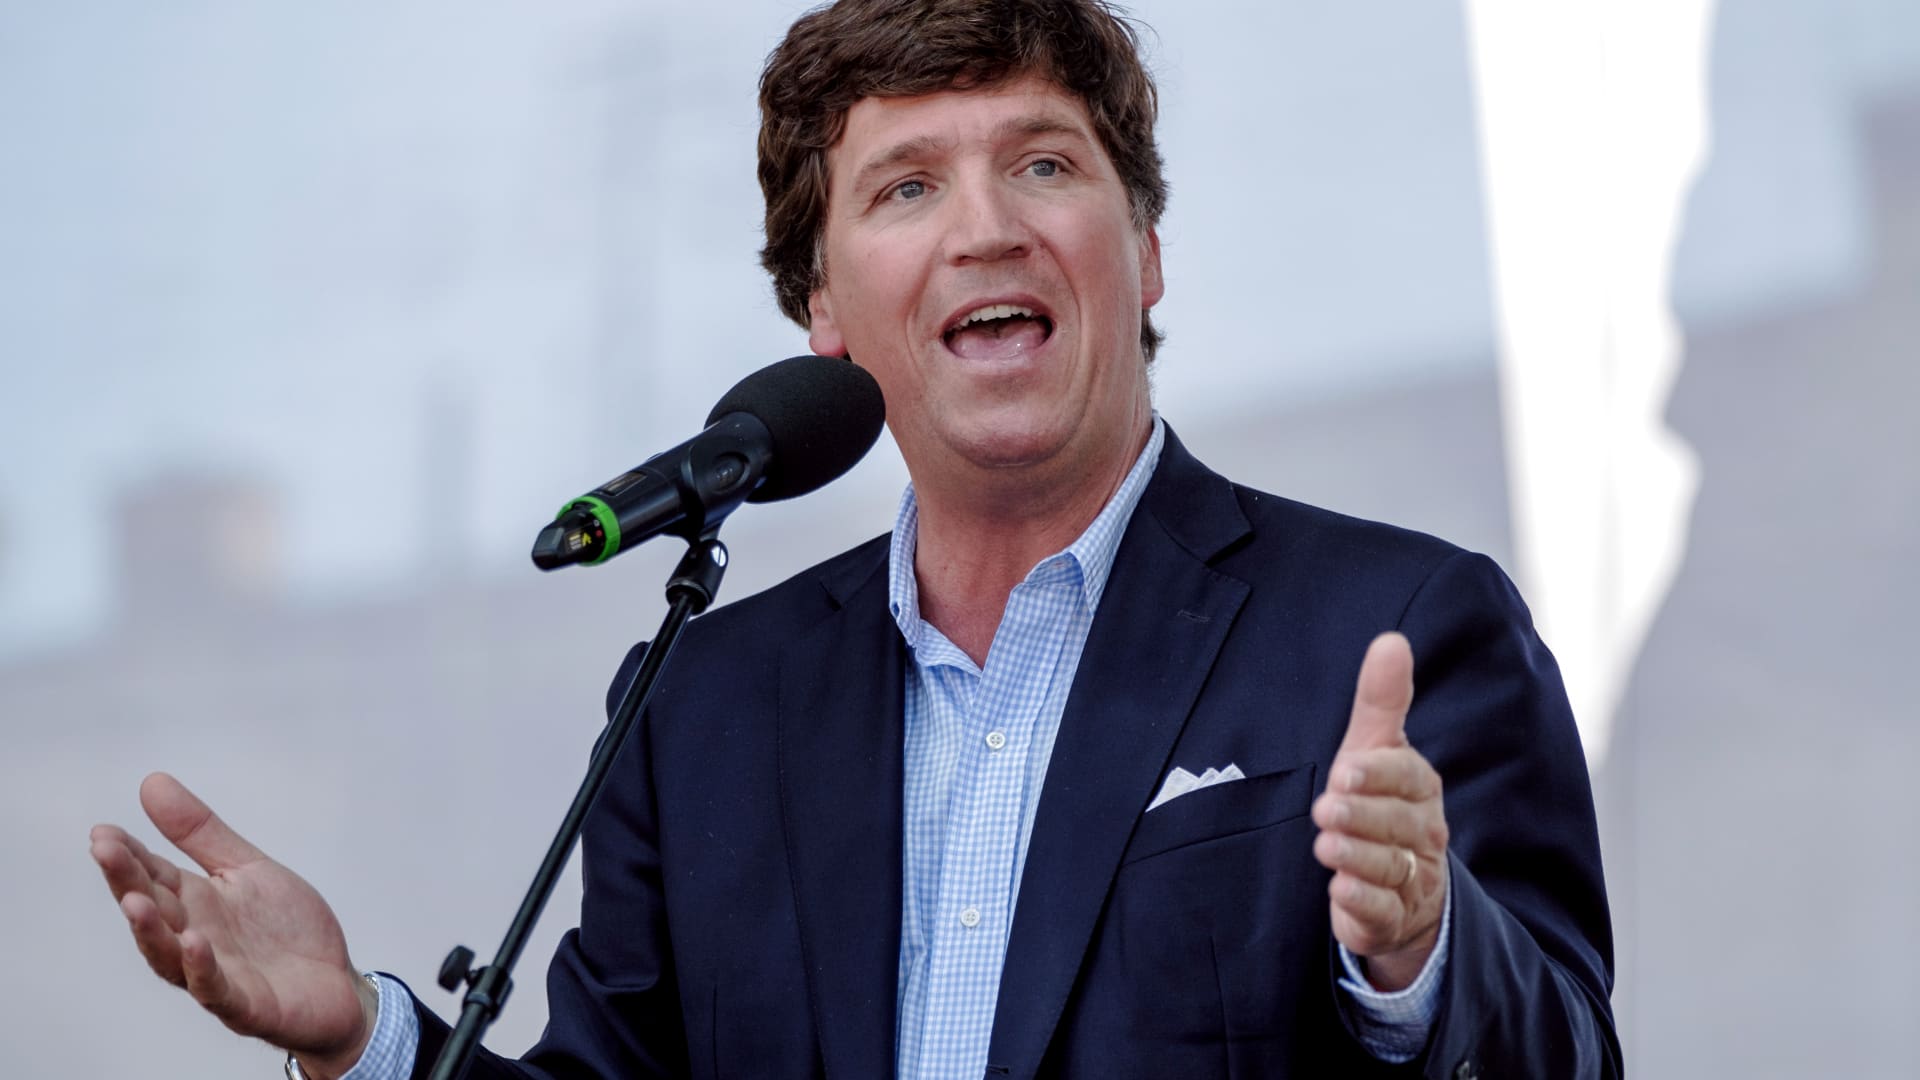 Tucker Carlson to host Twitter show after being fired from Fox News